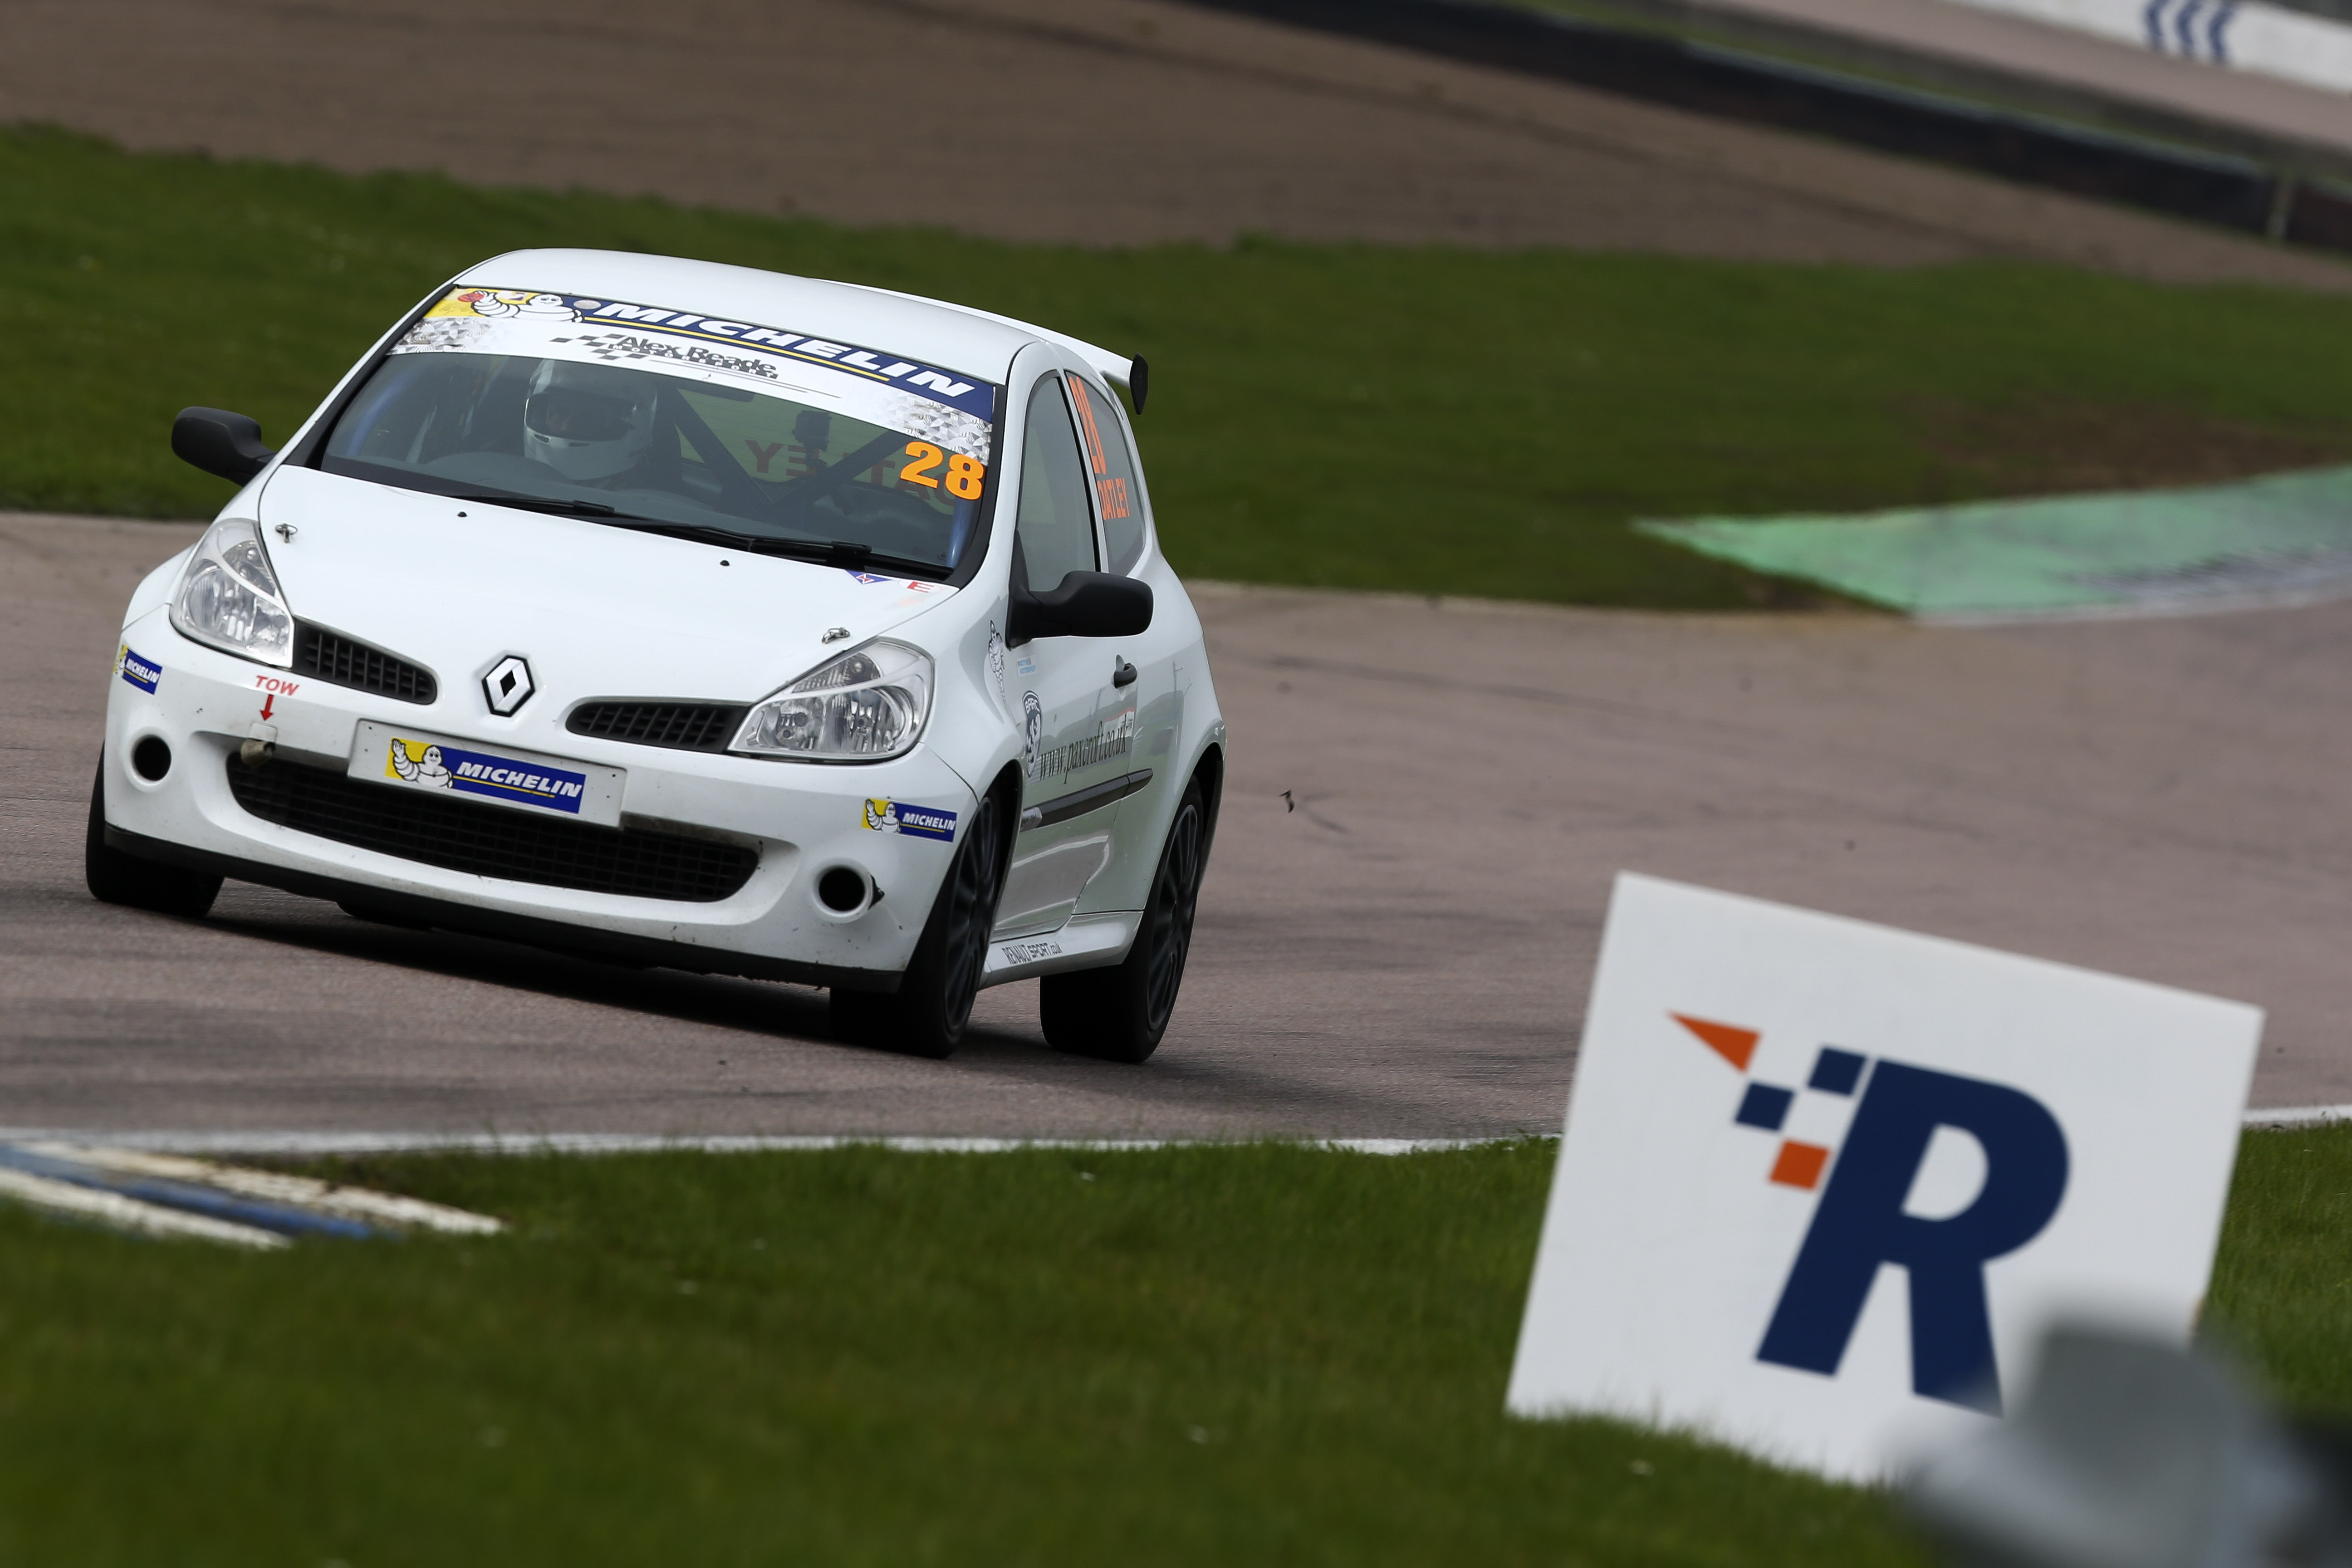 BATTLE IN MICHELIN CLIO CUP SERIES CHAMPIONSHIP SET BECOME EVER CLOSER